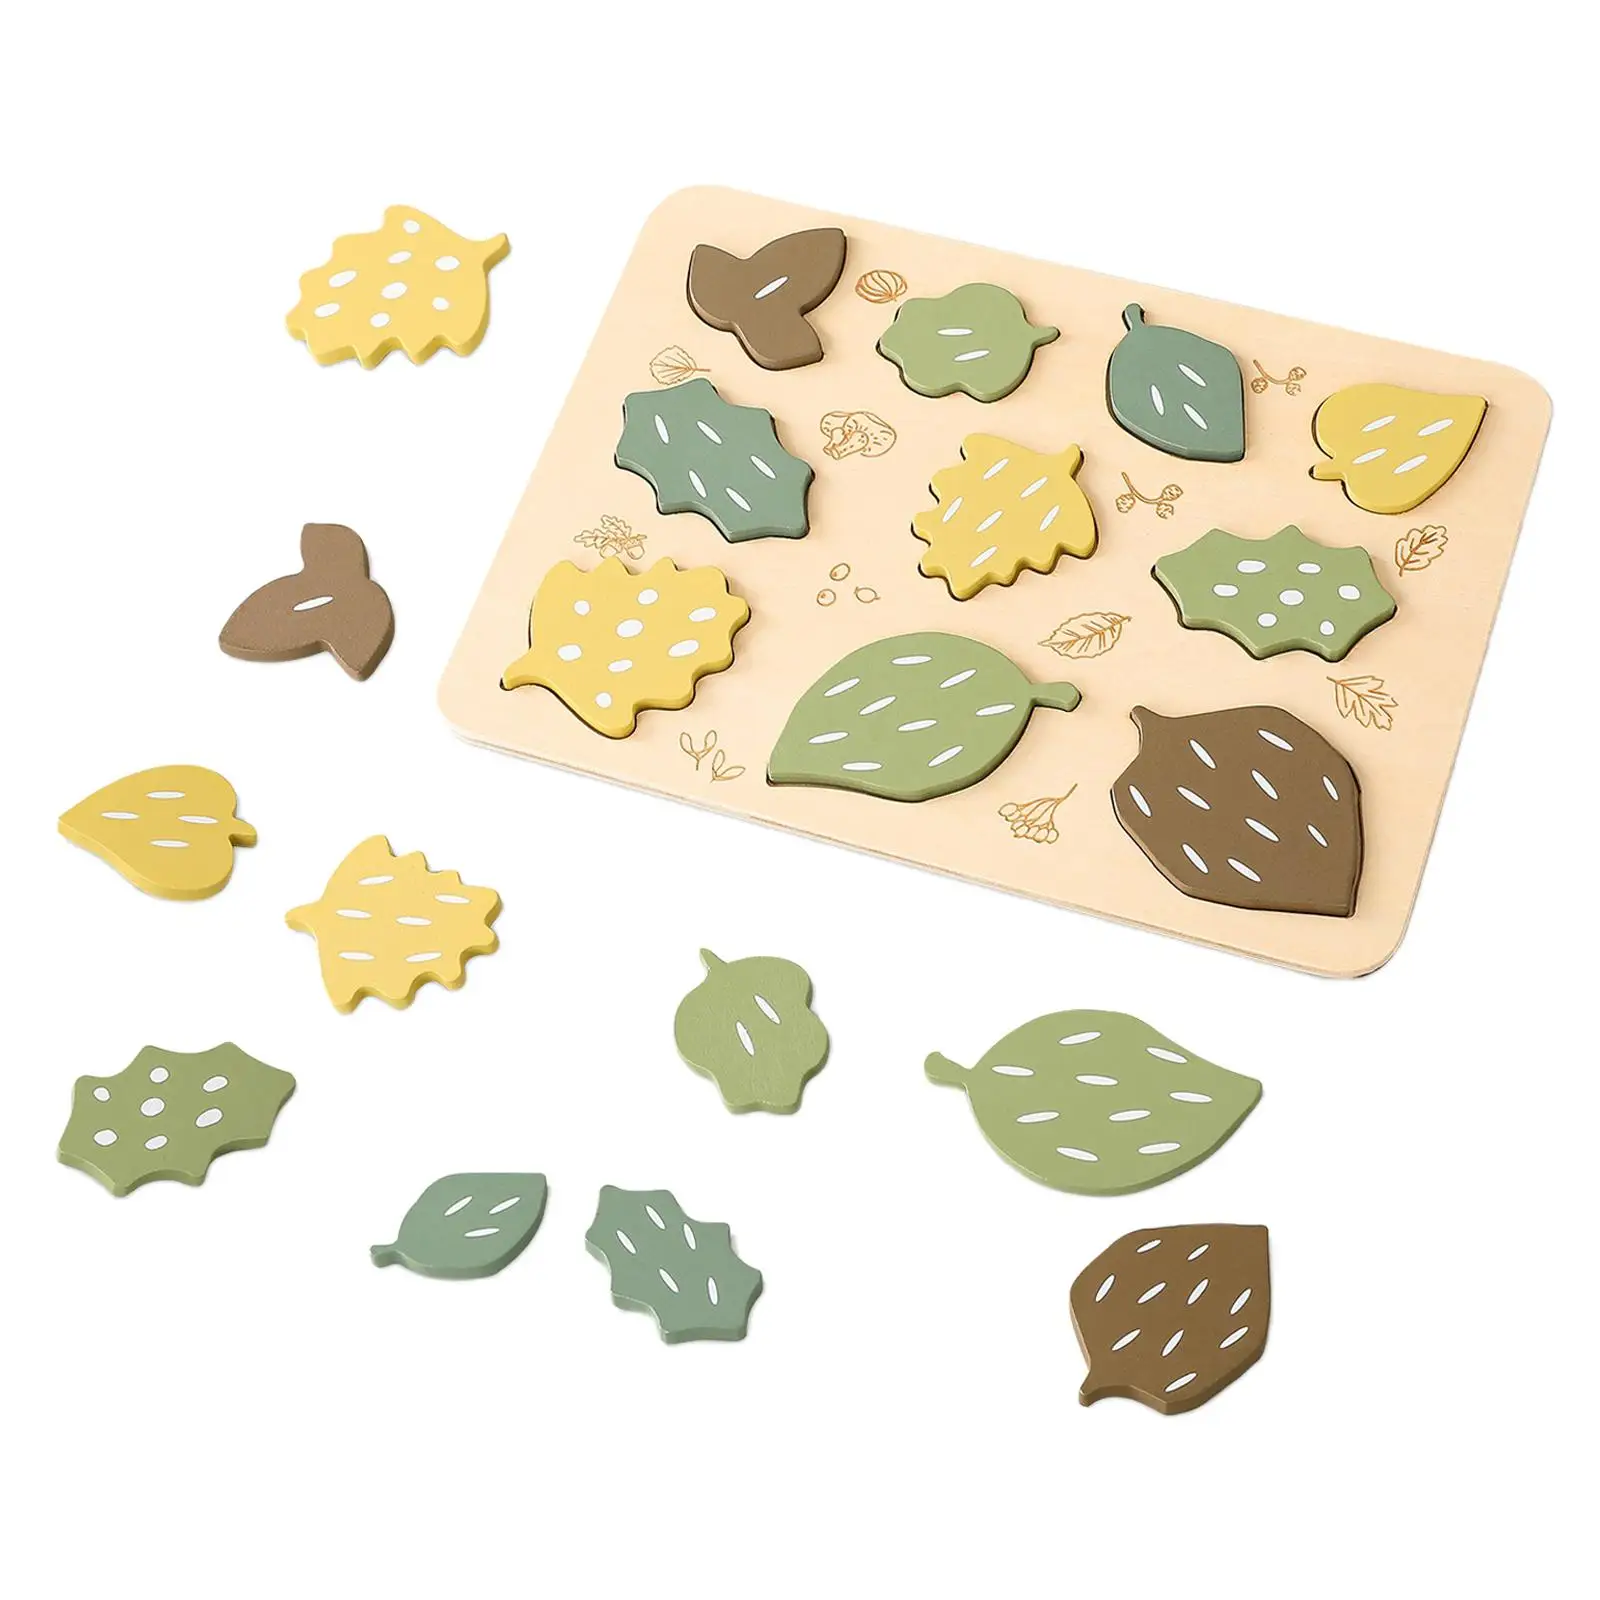 Leaf Jigsaw Puzzles Sorting Puzzle Montessori Colorful Shape Stacking Blocks for Preschool Toddlers Boys Kids Girls